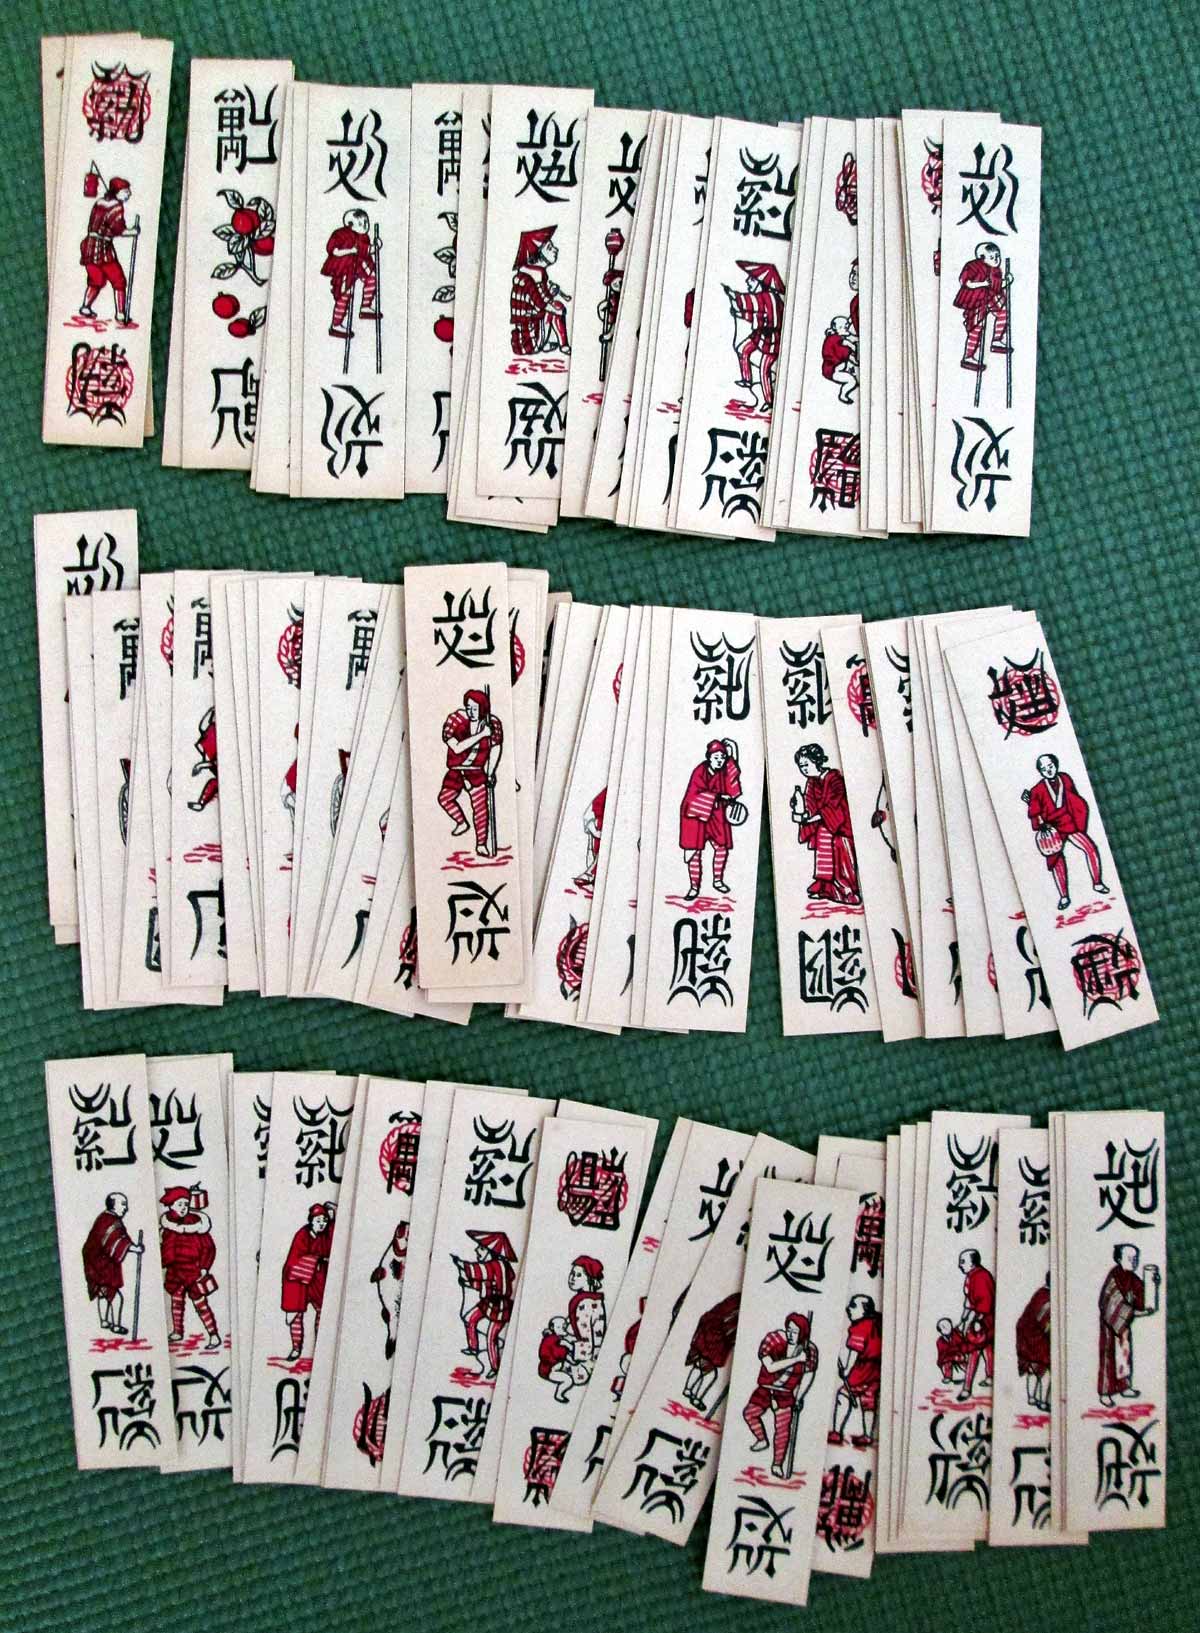 Tô Tôm cards manufactured by A. Camoin & Cie, Marseille, c.1900